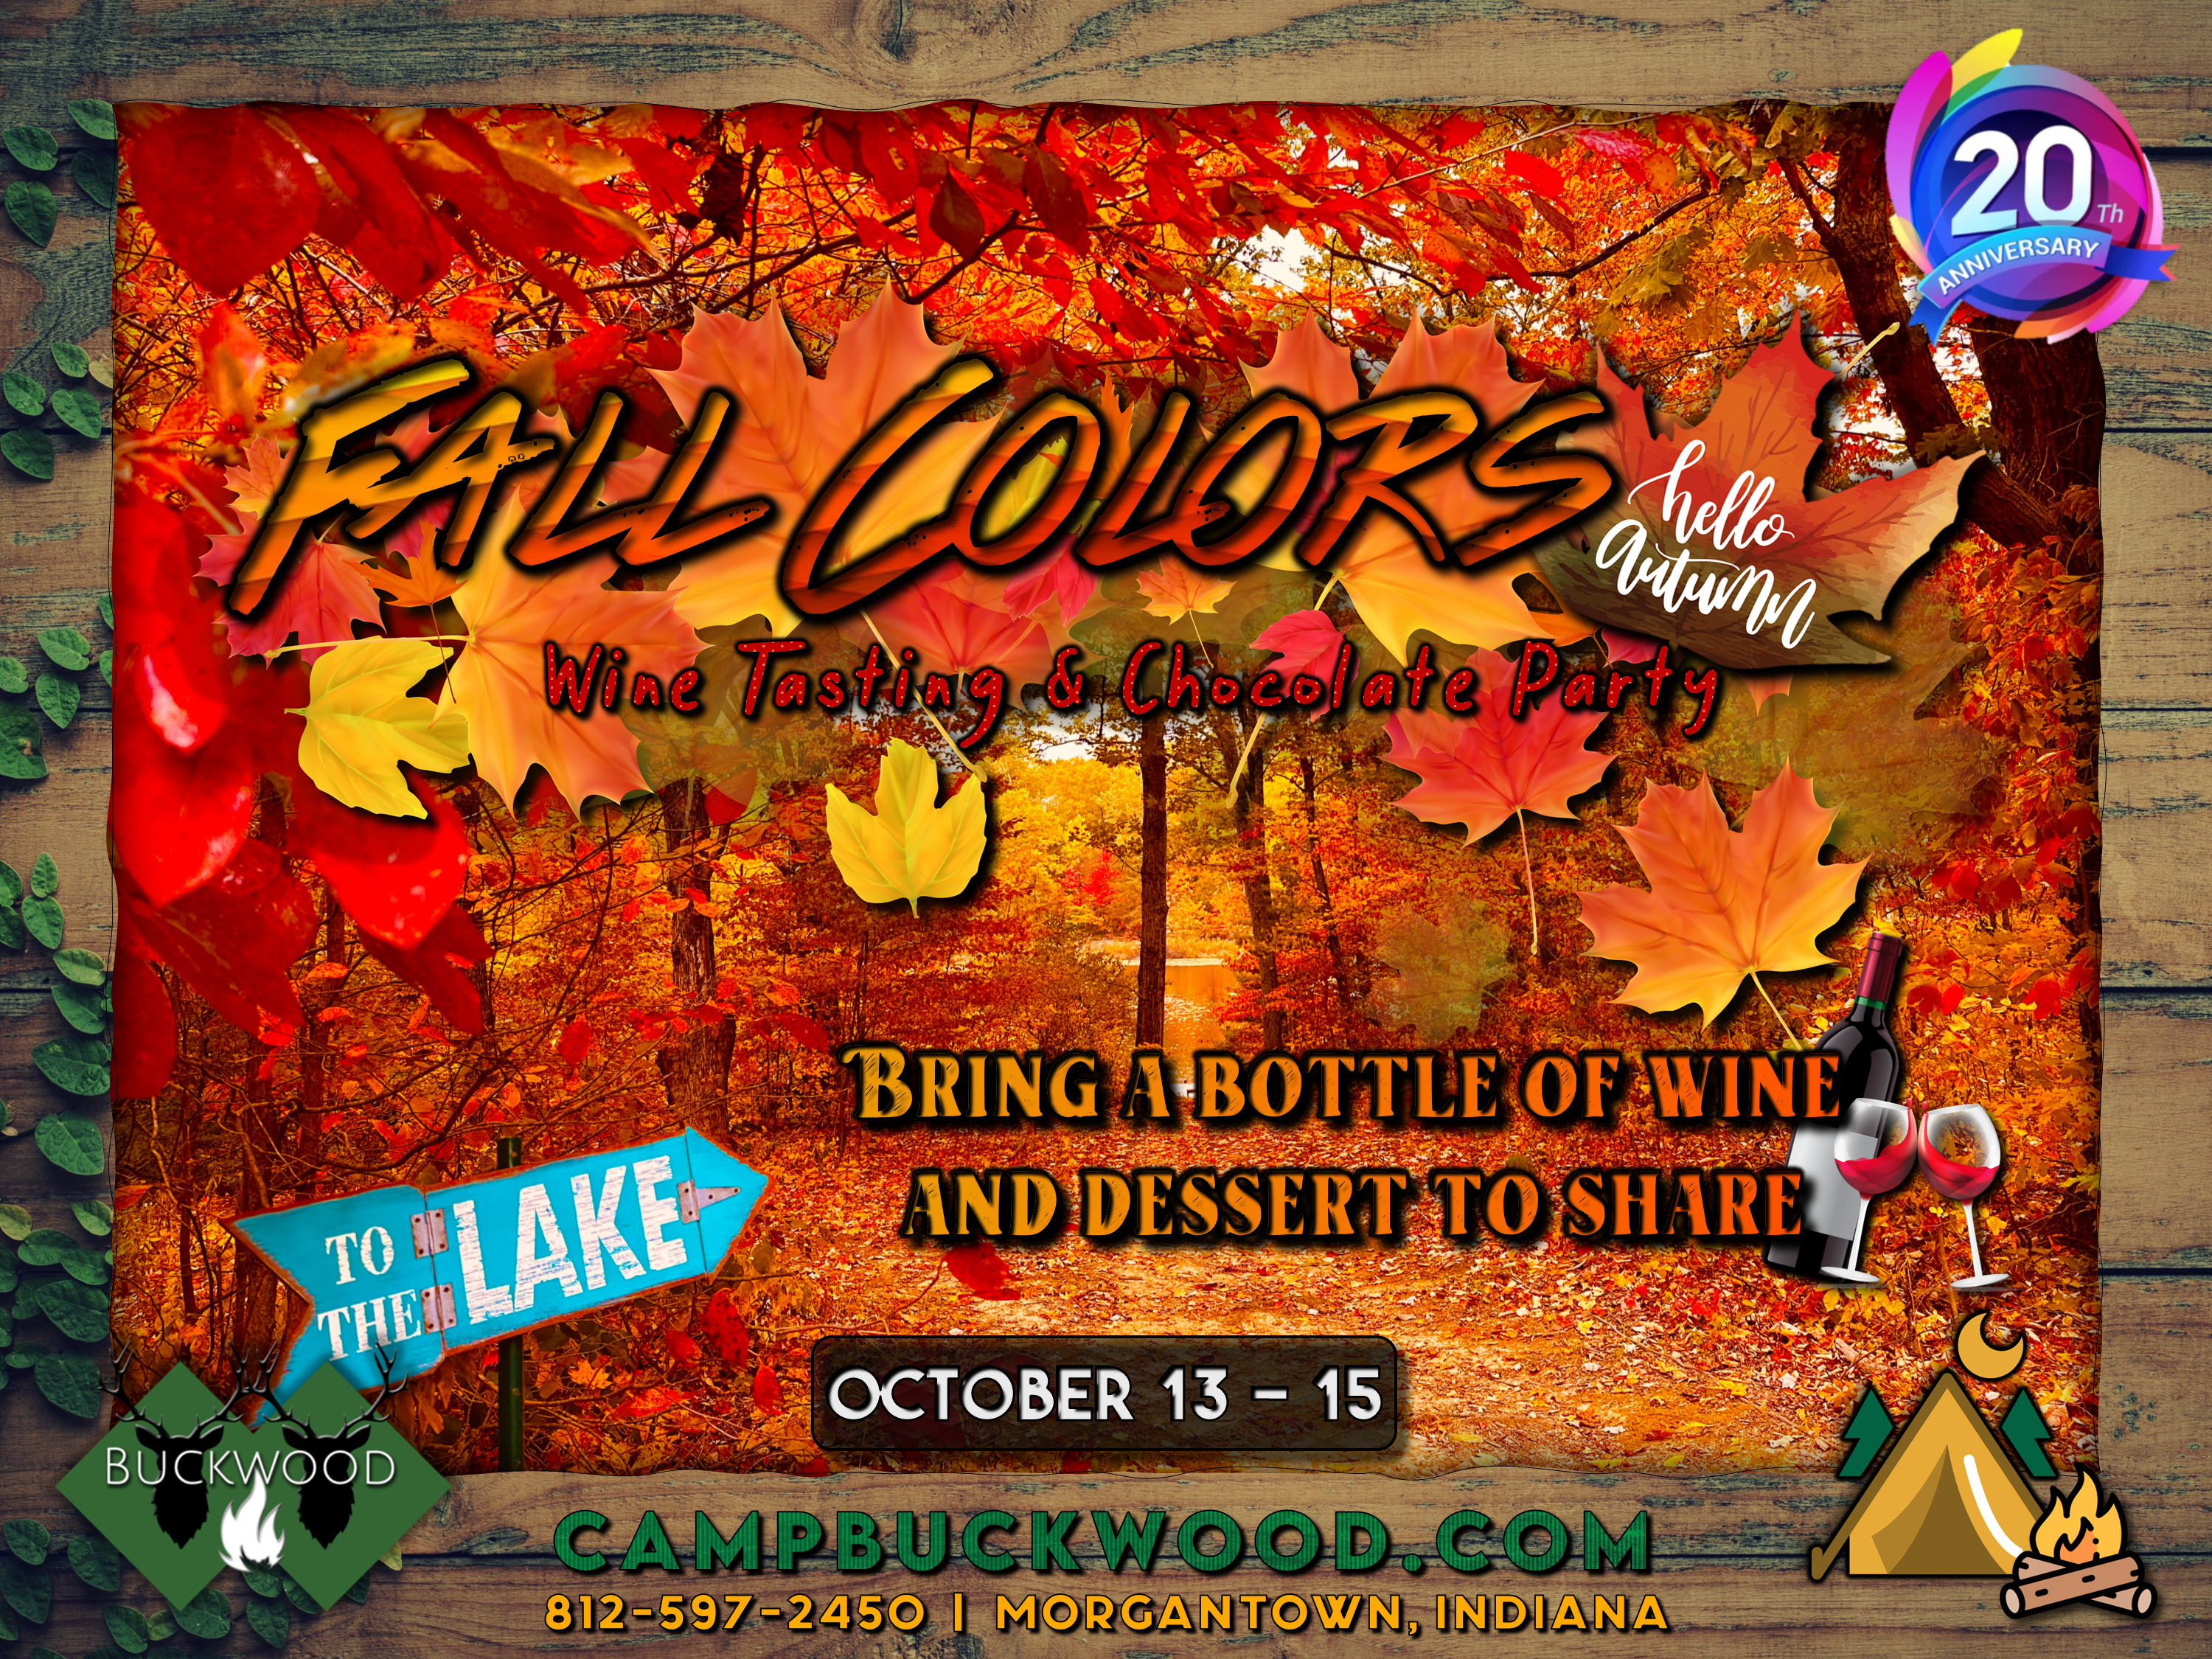 Camp Buckwood 2023 Fall Colors Weekend Event